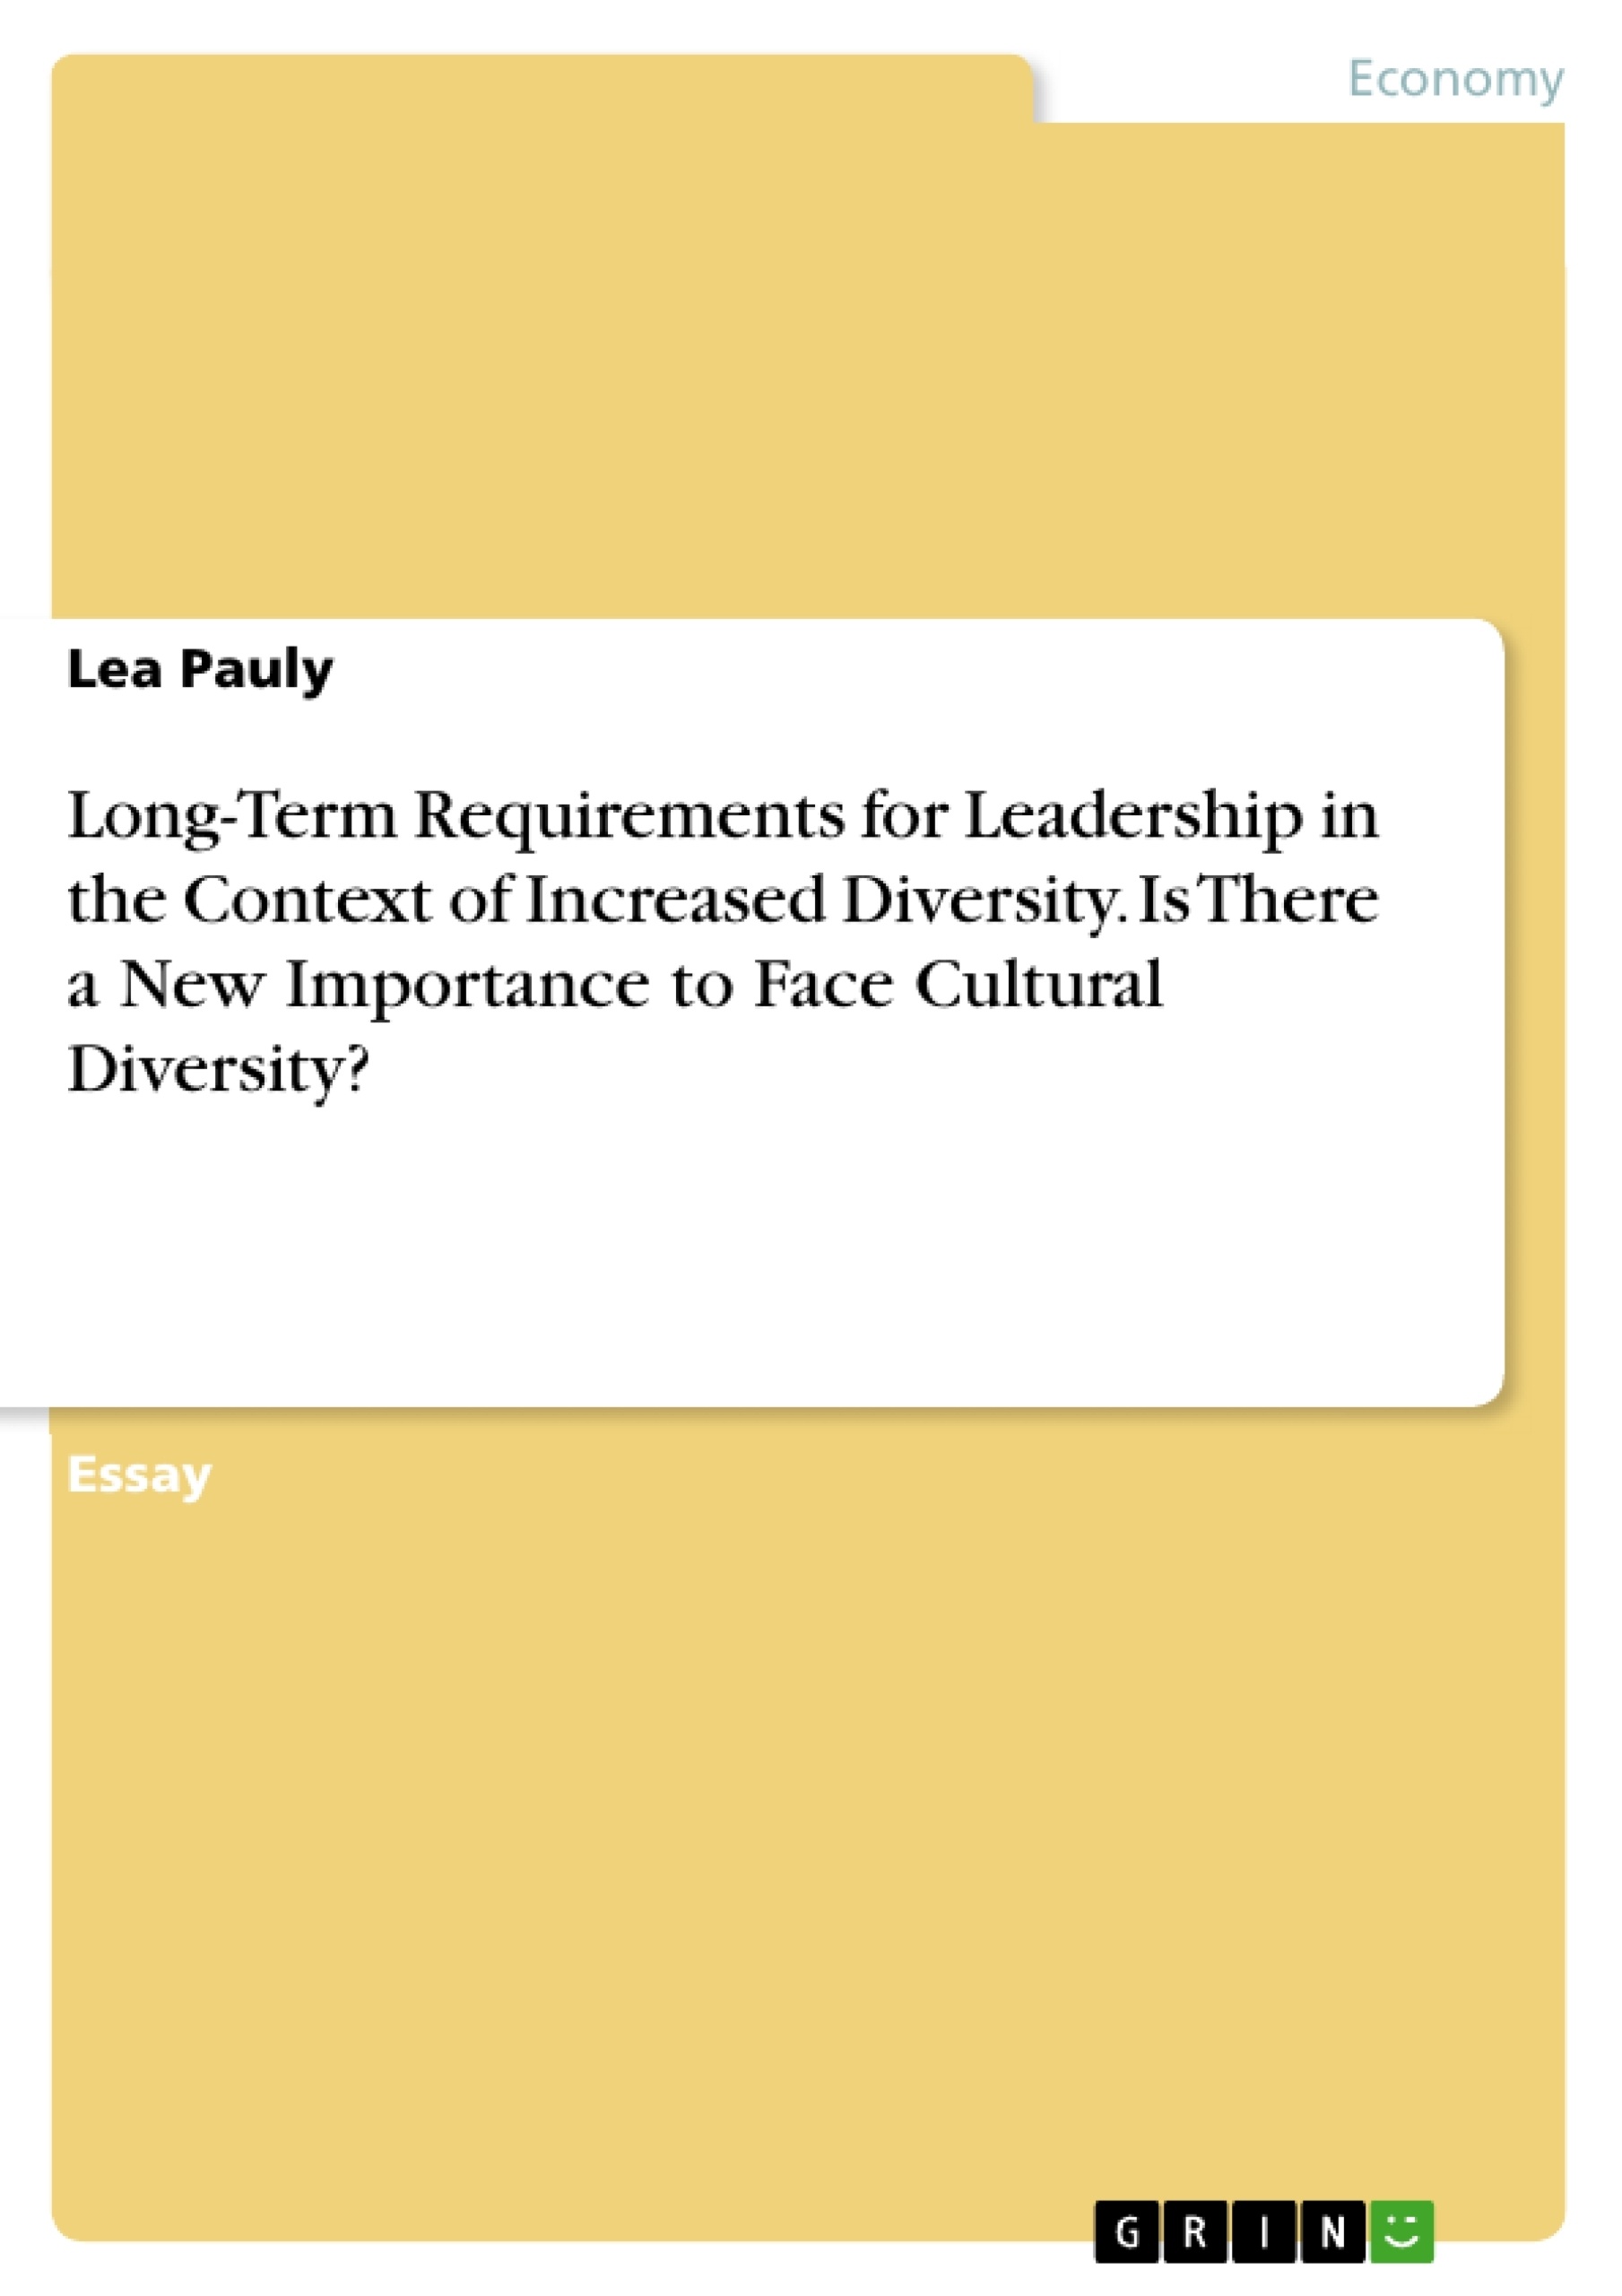 Titre: Long-Term Requirements for Leadership in the Context of Increased Diversity. Is There a New Importance to Face Cultural Diversity?